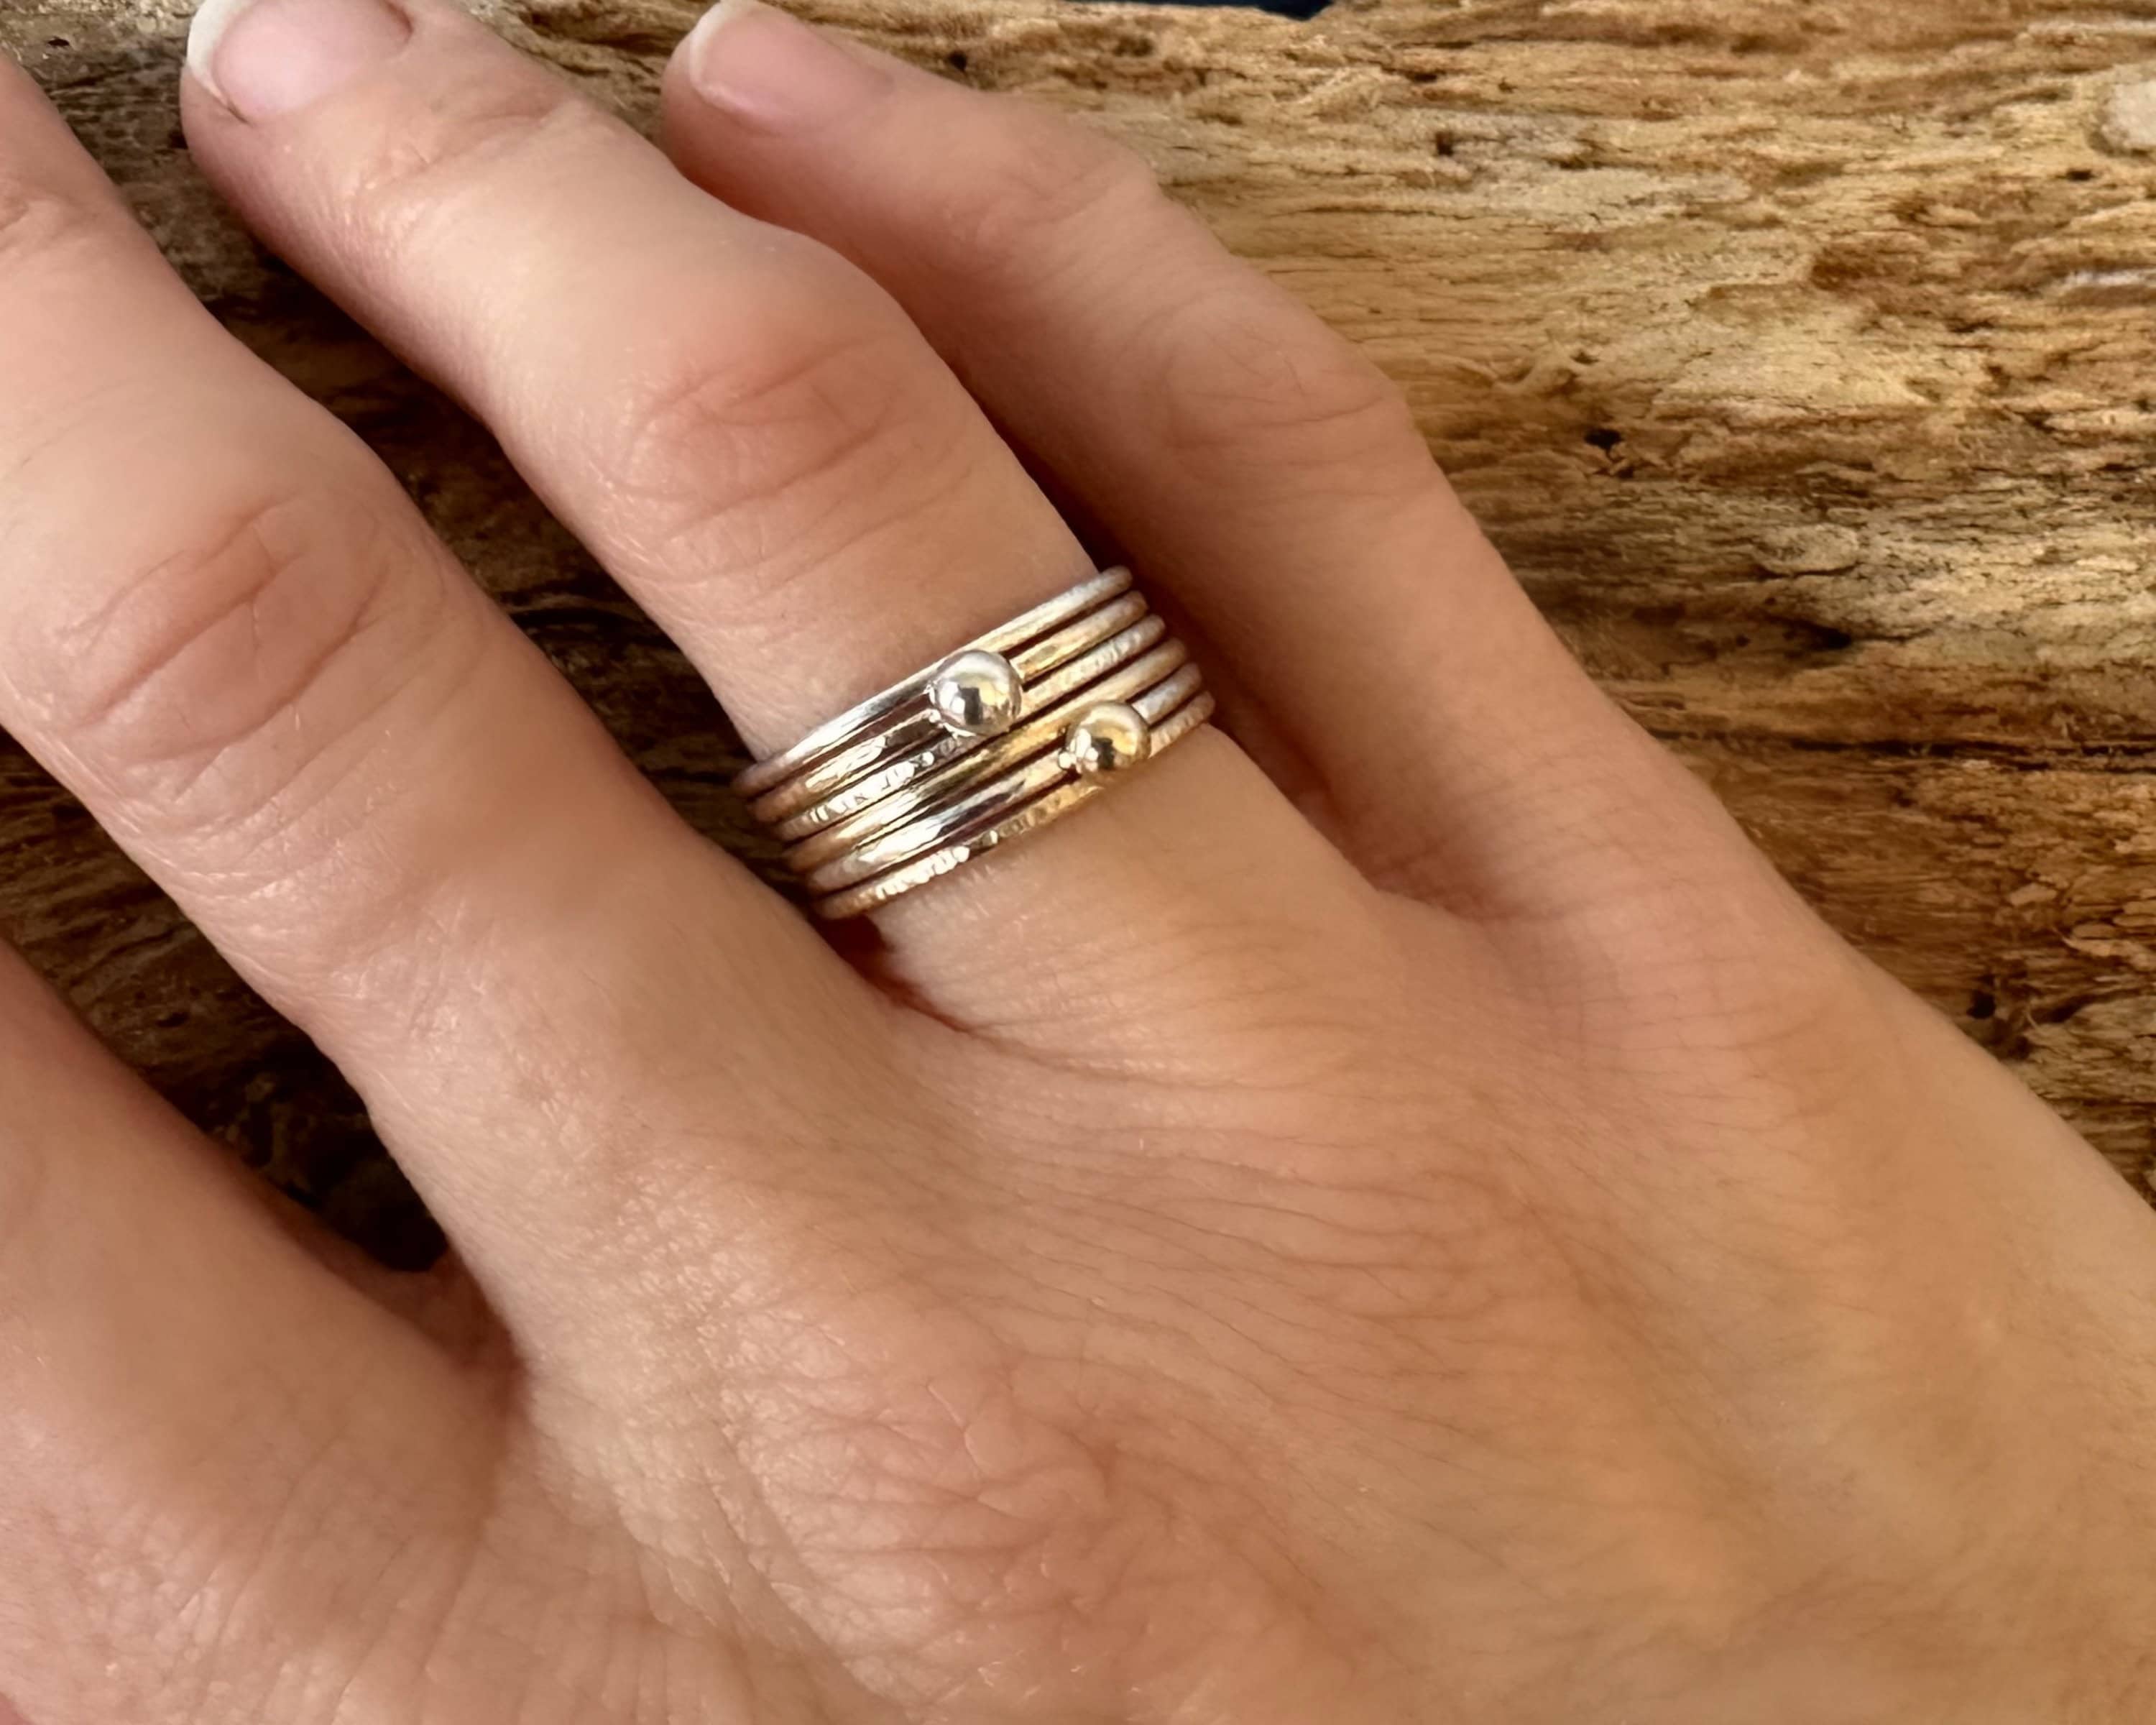 Famke Jewellery - A hammered version of the 9ct YG dainty stack ring,  exclusively at the Concept Store and soon online 💕 - #famke  #famkejewellery #jewellerydesign #jewellery #rings #simple #stackrings # stacking #hammered #